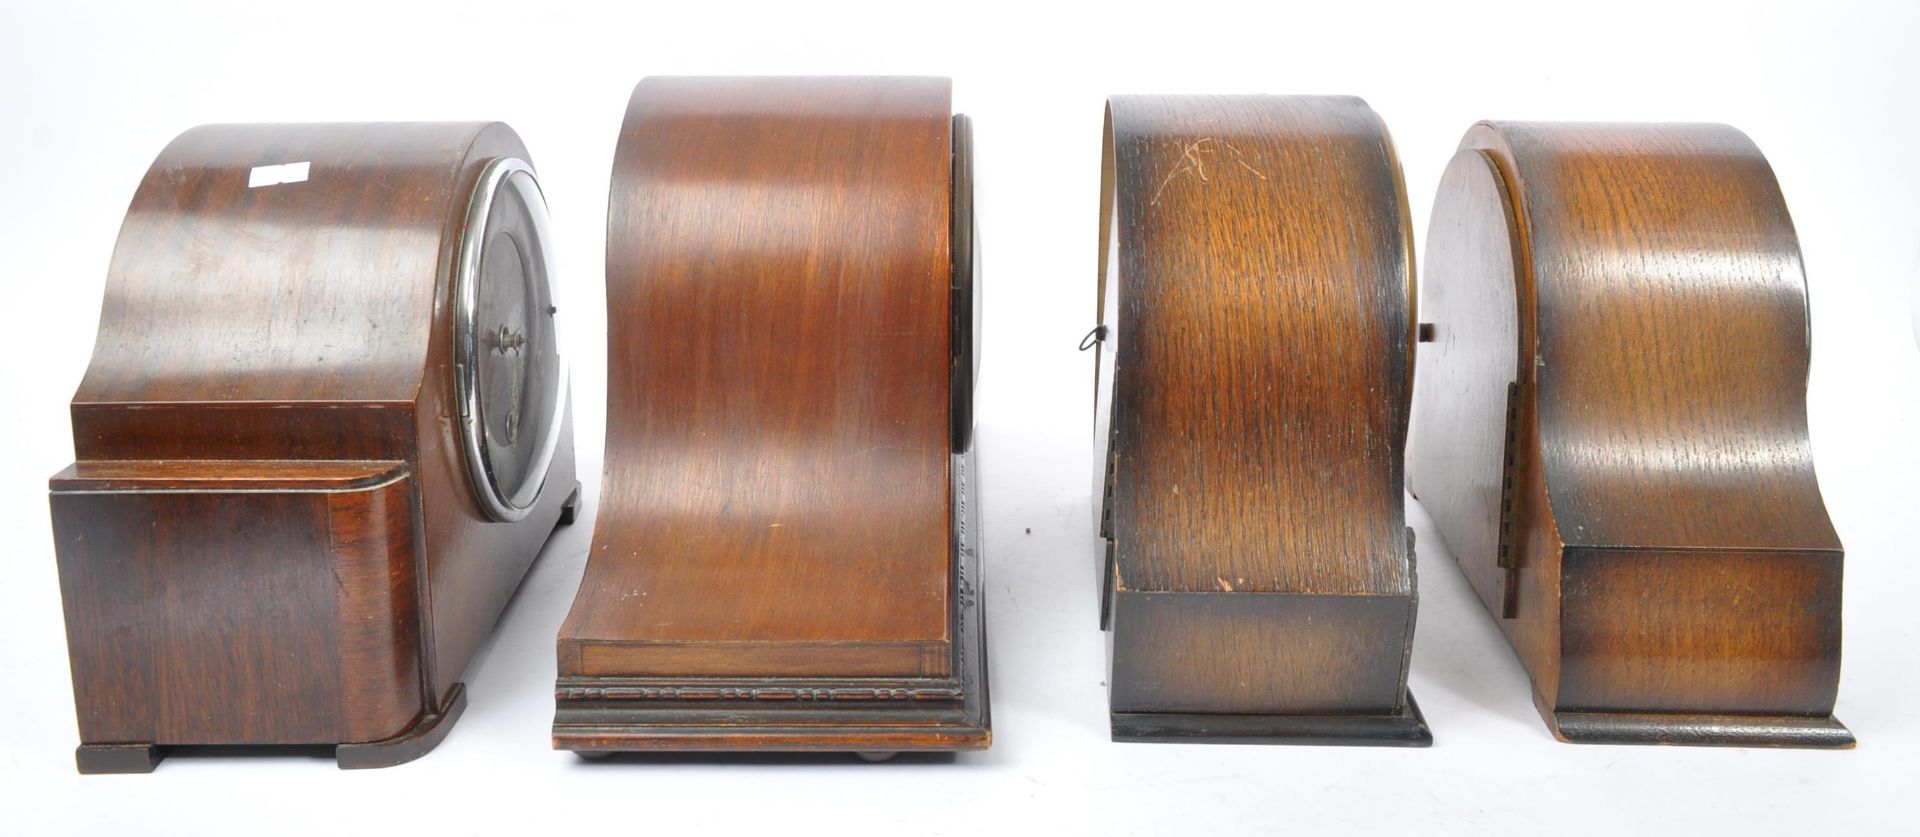 COLLECTION OF FOUR ART DECO MANTEL CLOCKS - Image 7 of 7